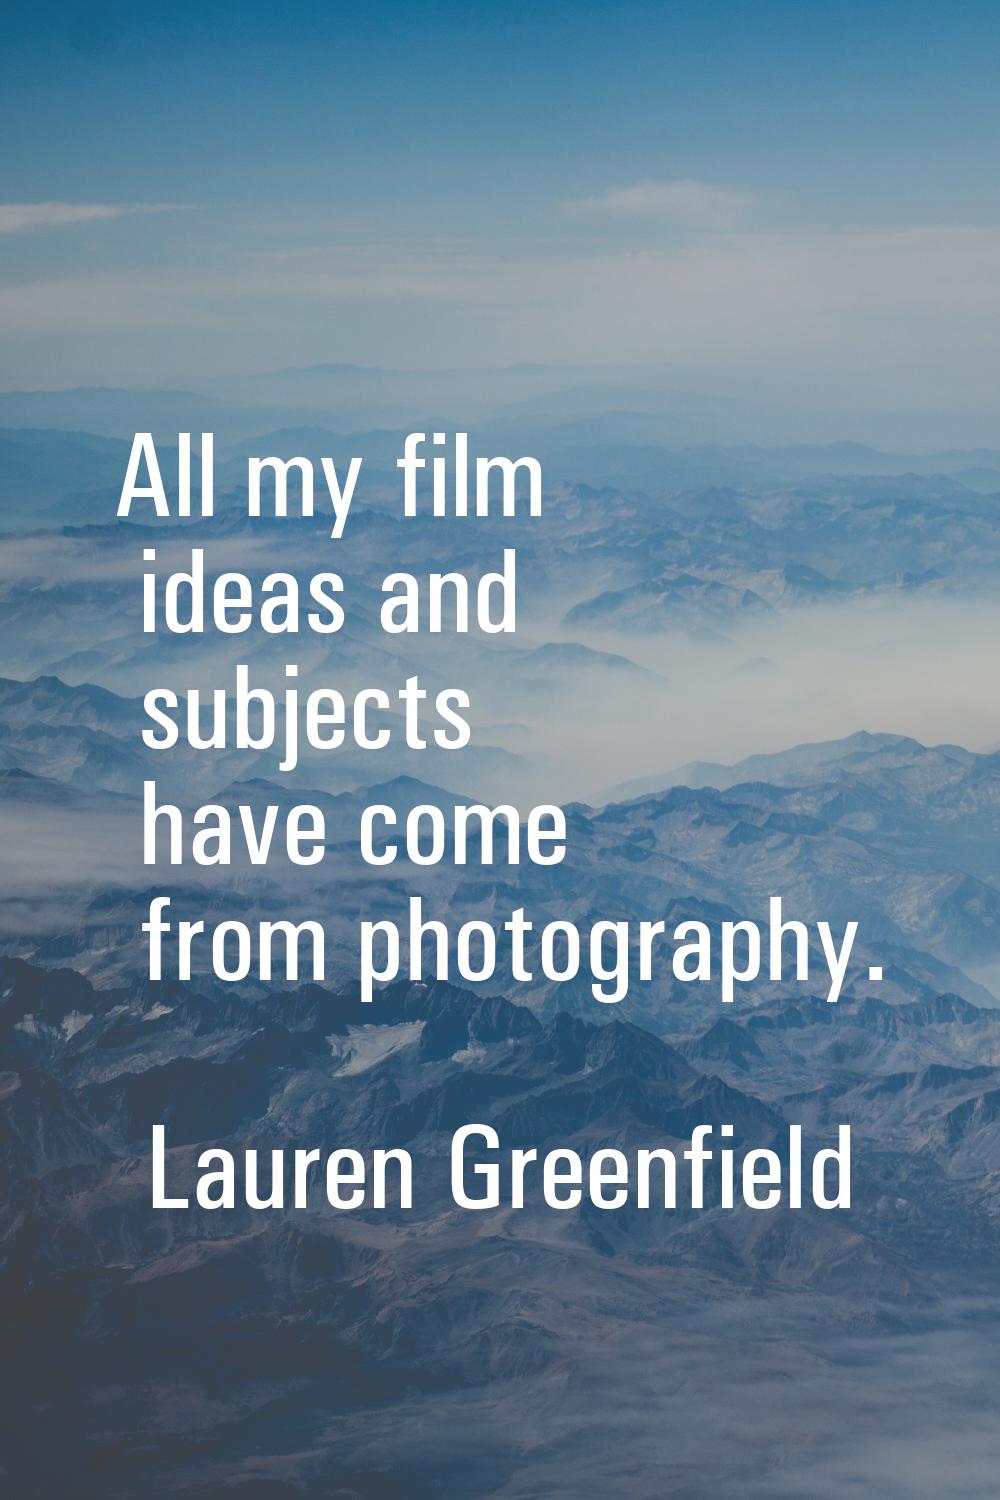 All my film ideas and subjects have come from photography.